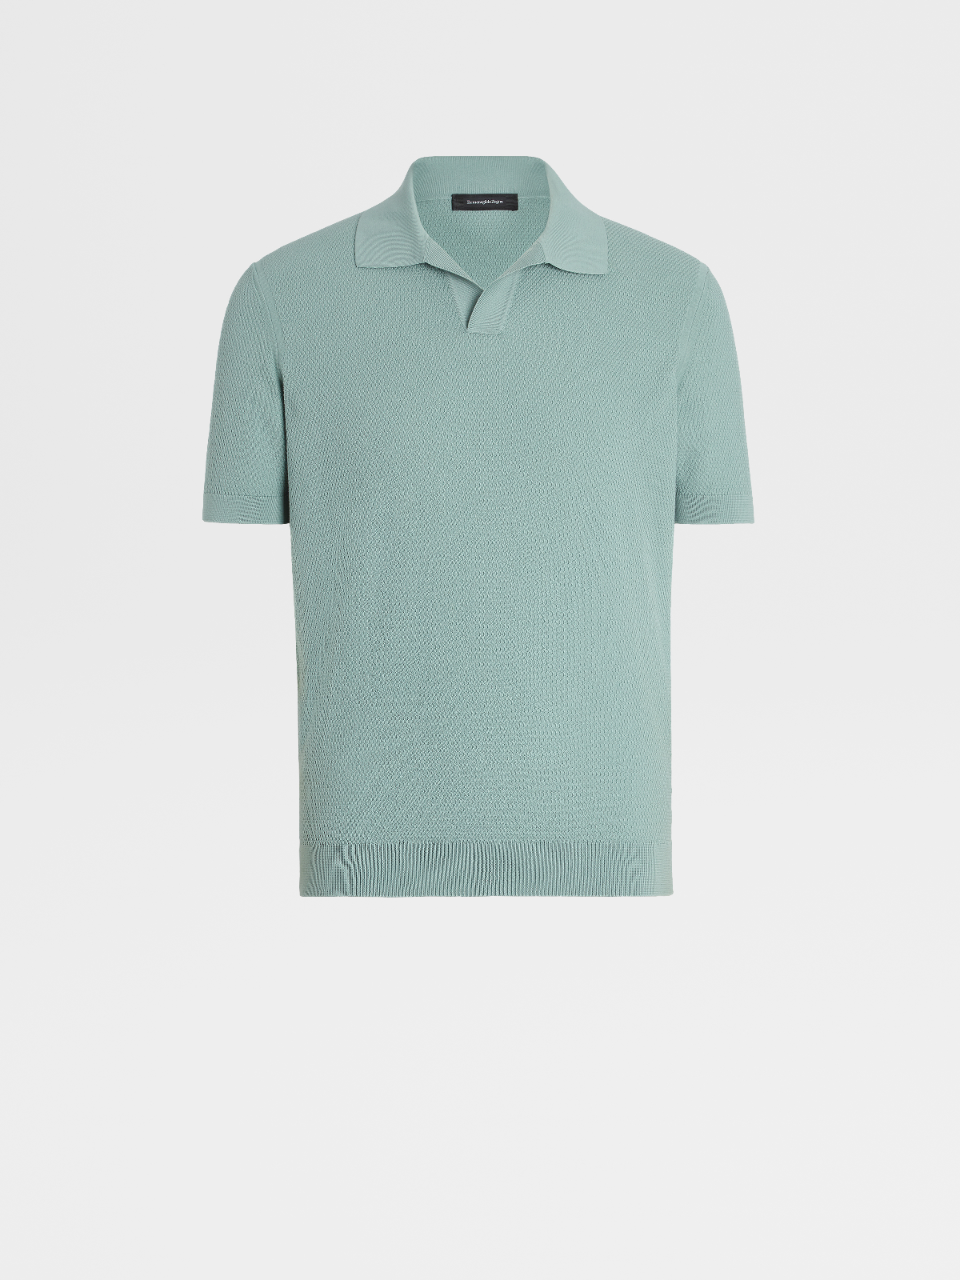 Pastel Green Pure Cotton Knit Short-sleeve Polo